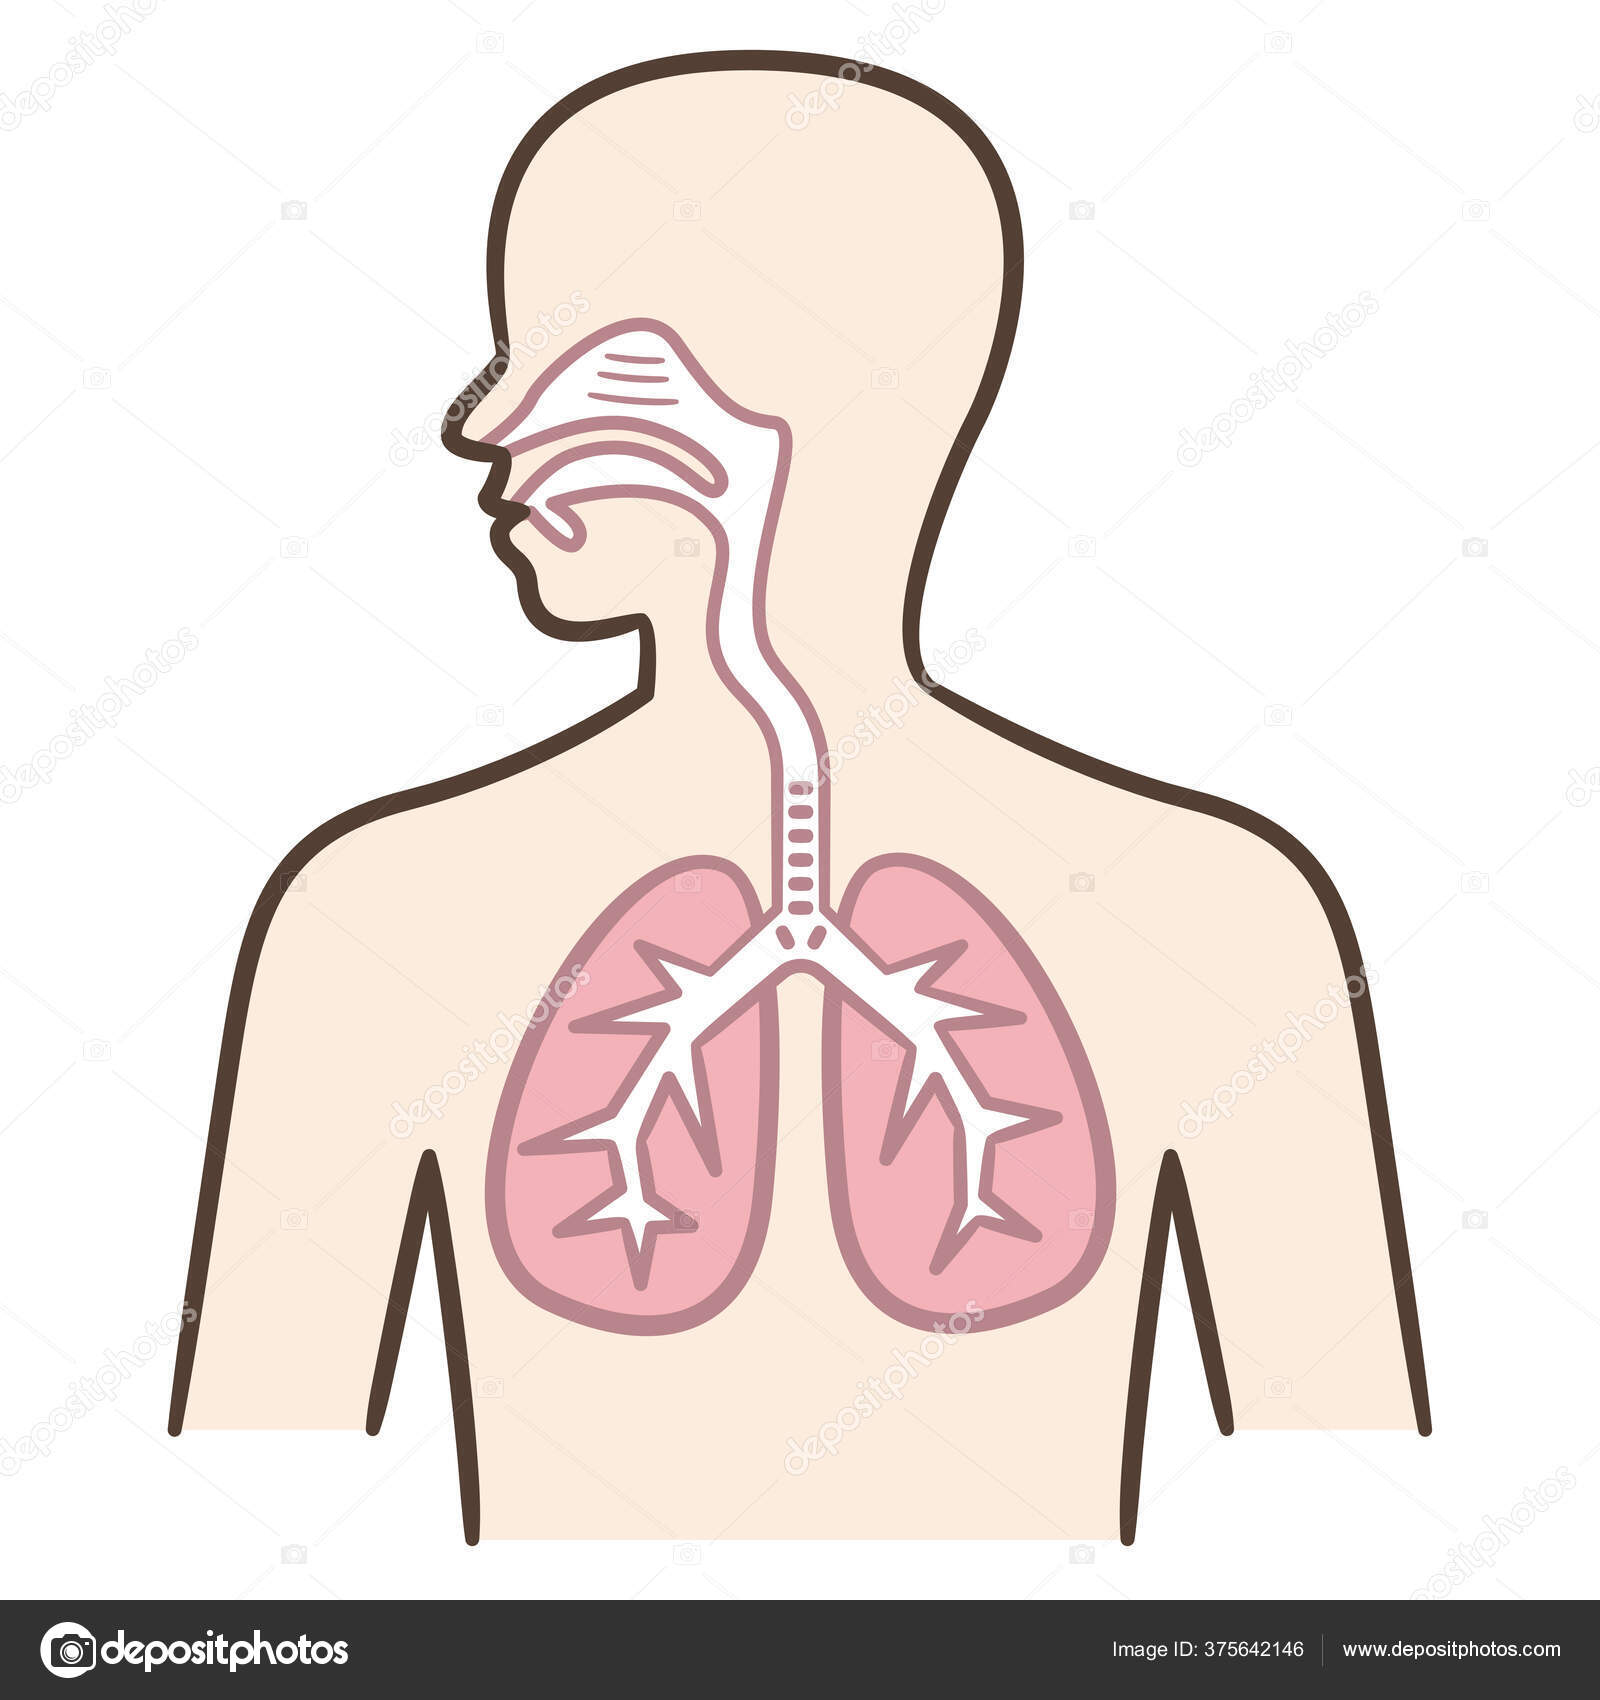 How to draw Lungs diagram | Science drawing, Biology diagrams, Biology  lessons